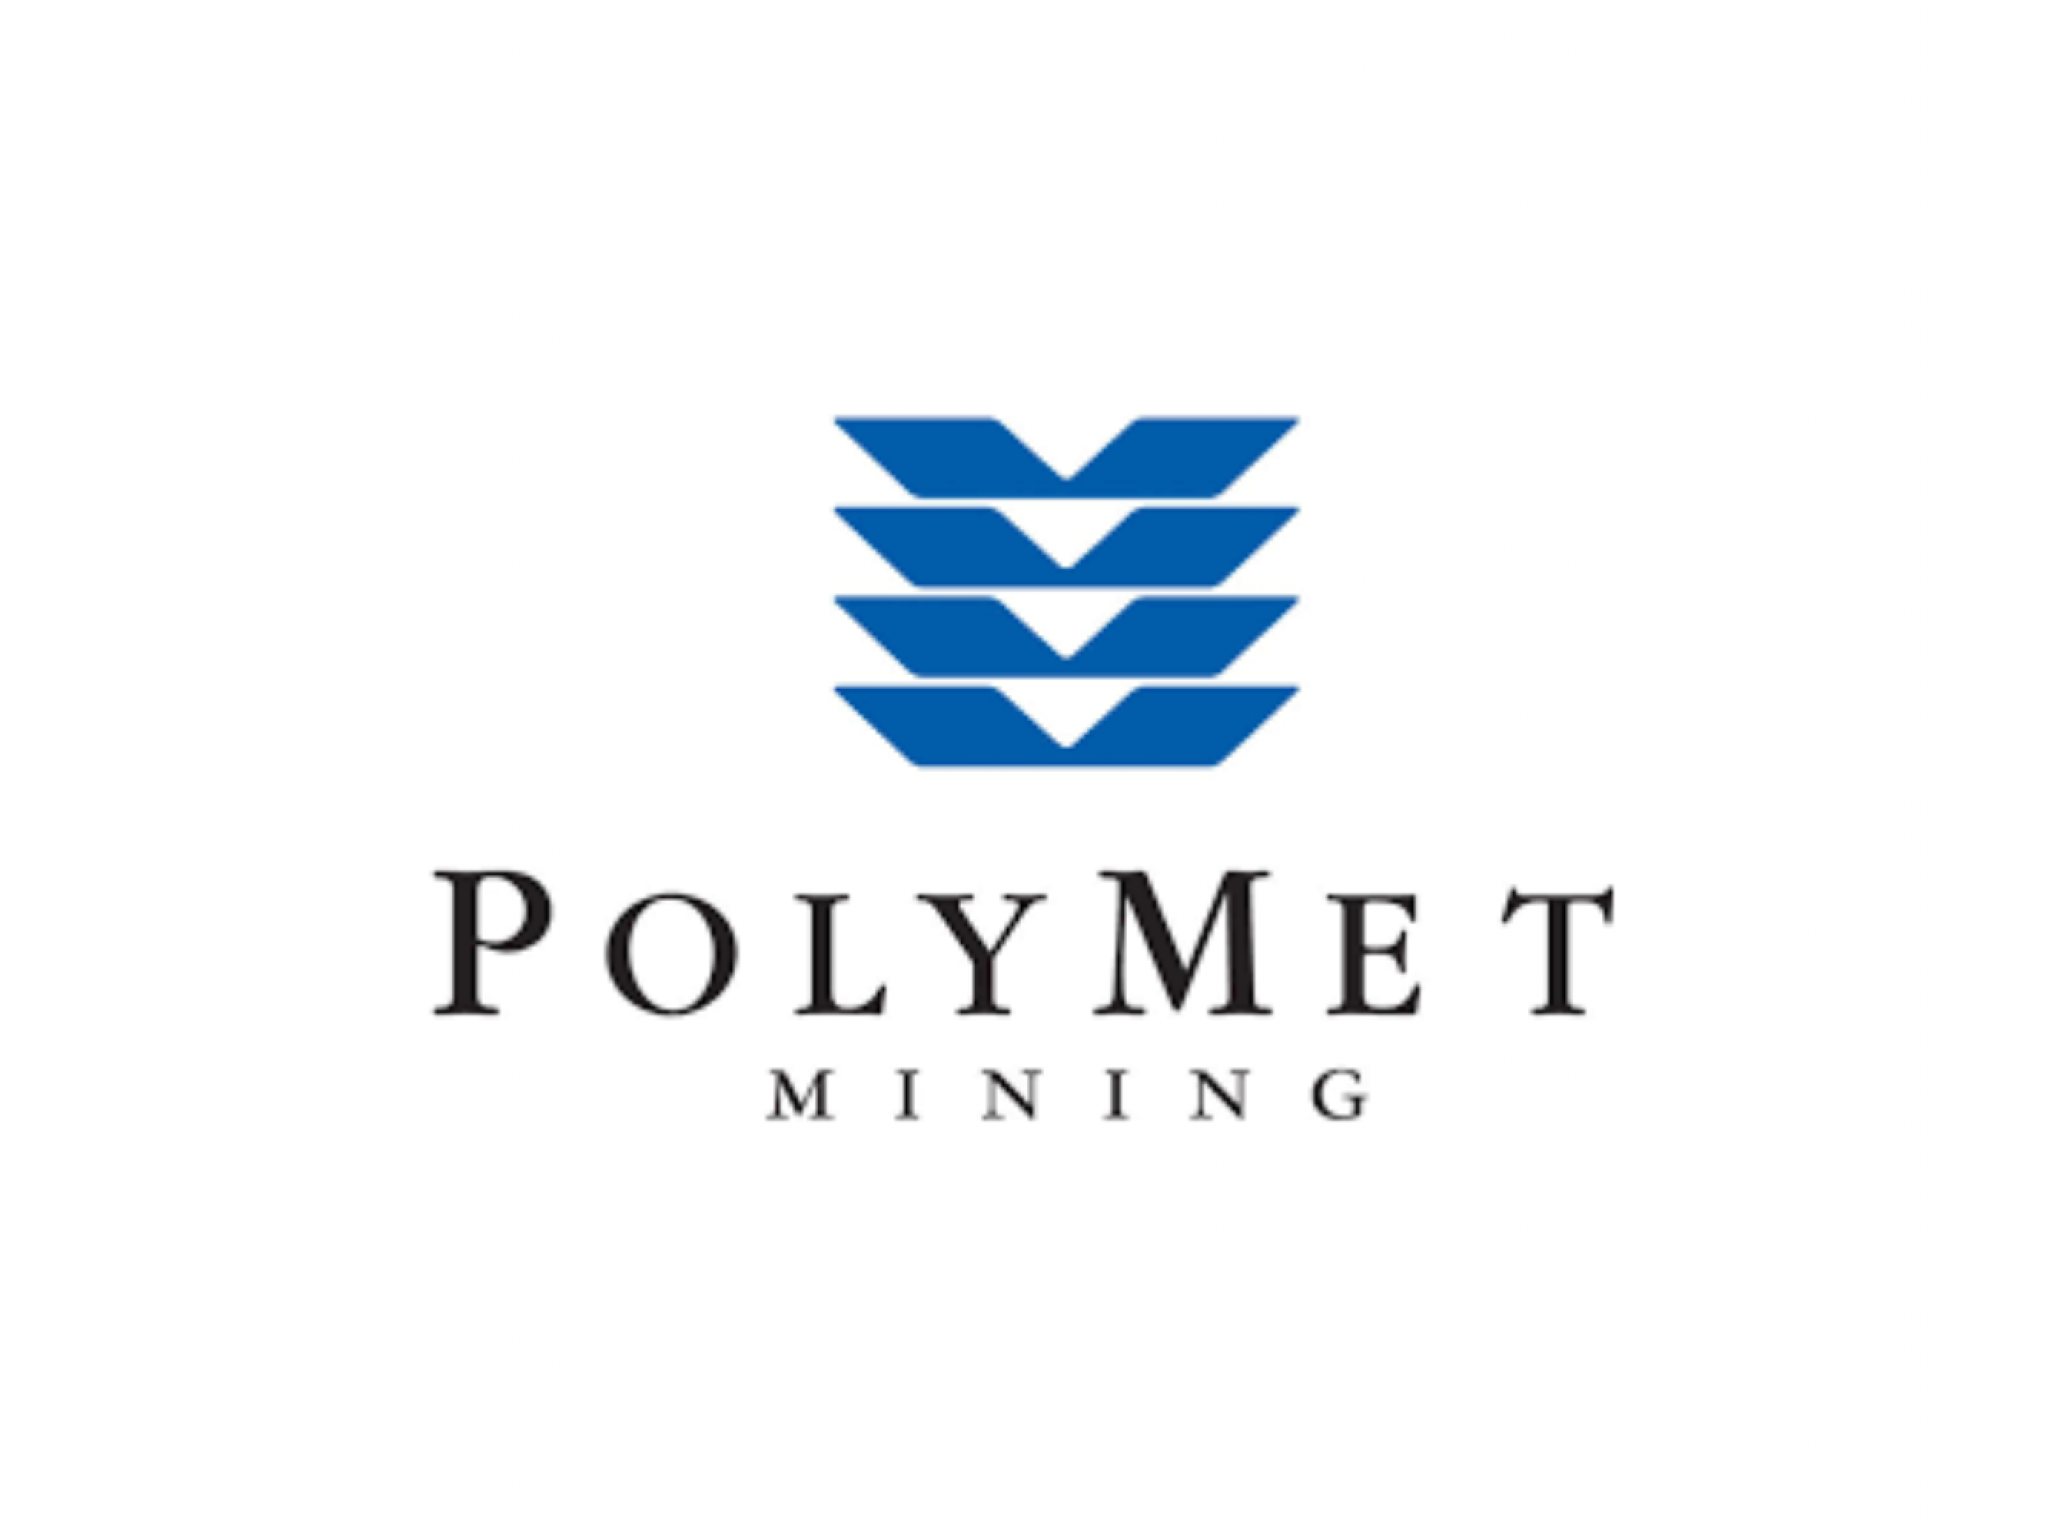  polymet-accepts-glencores-offer-to-sell-remaining-shares 